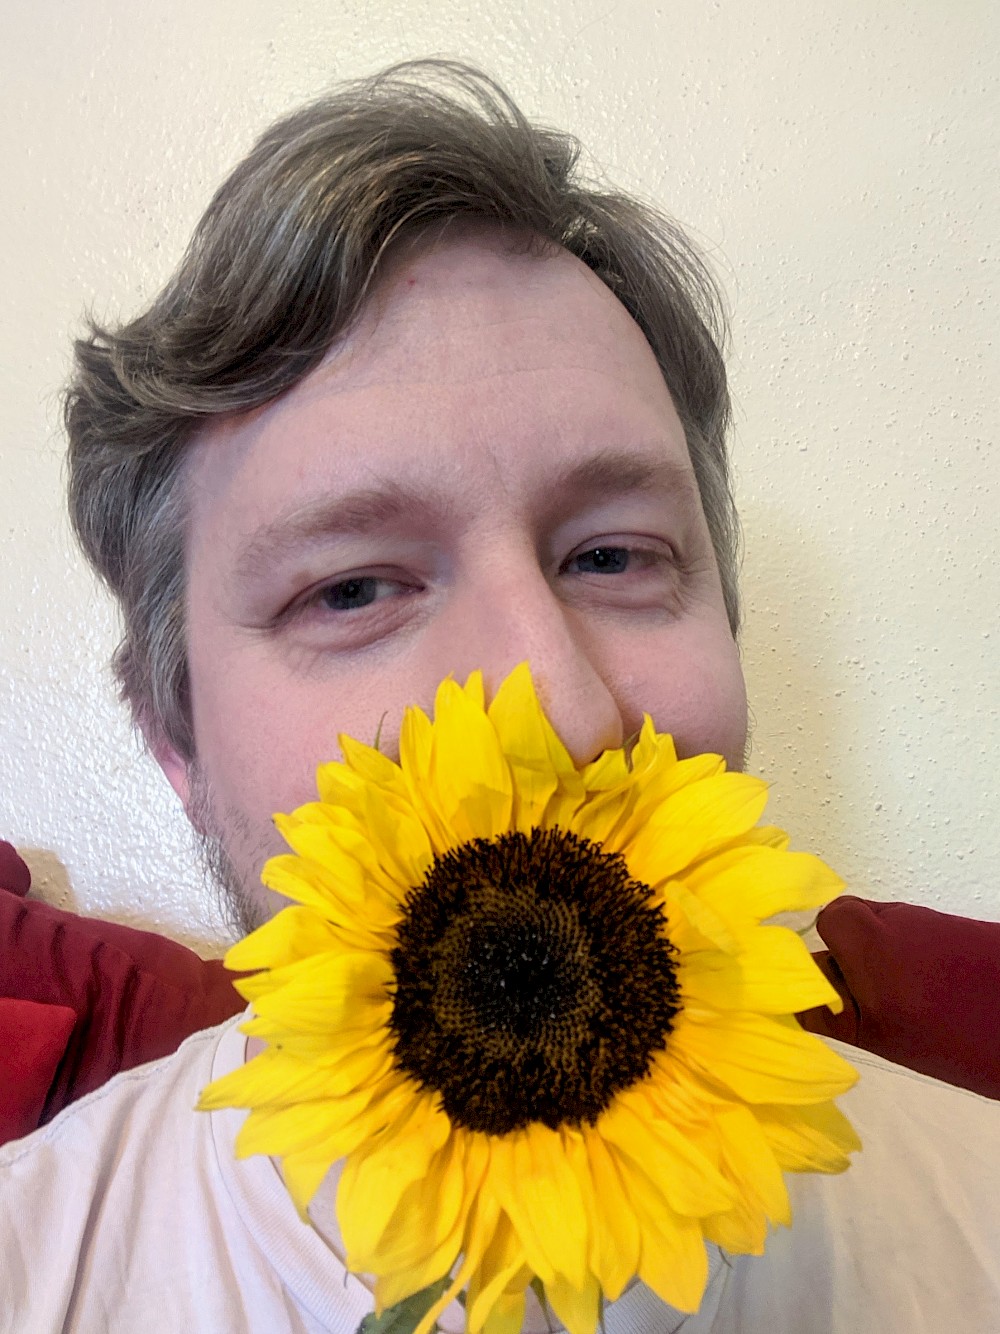 selfie holding a sunflower over my mouth and chin